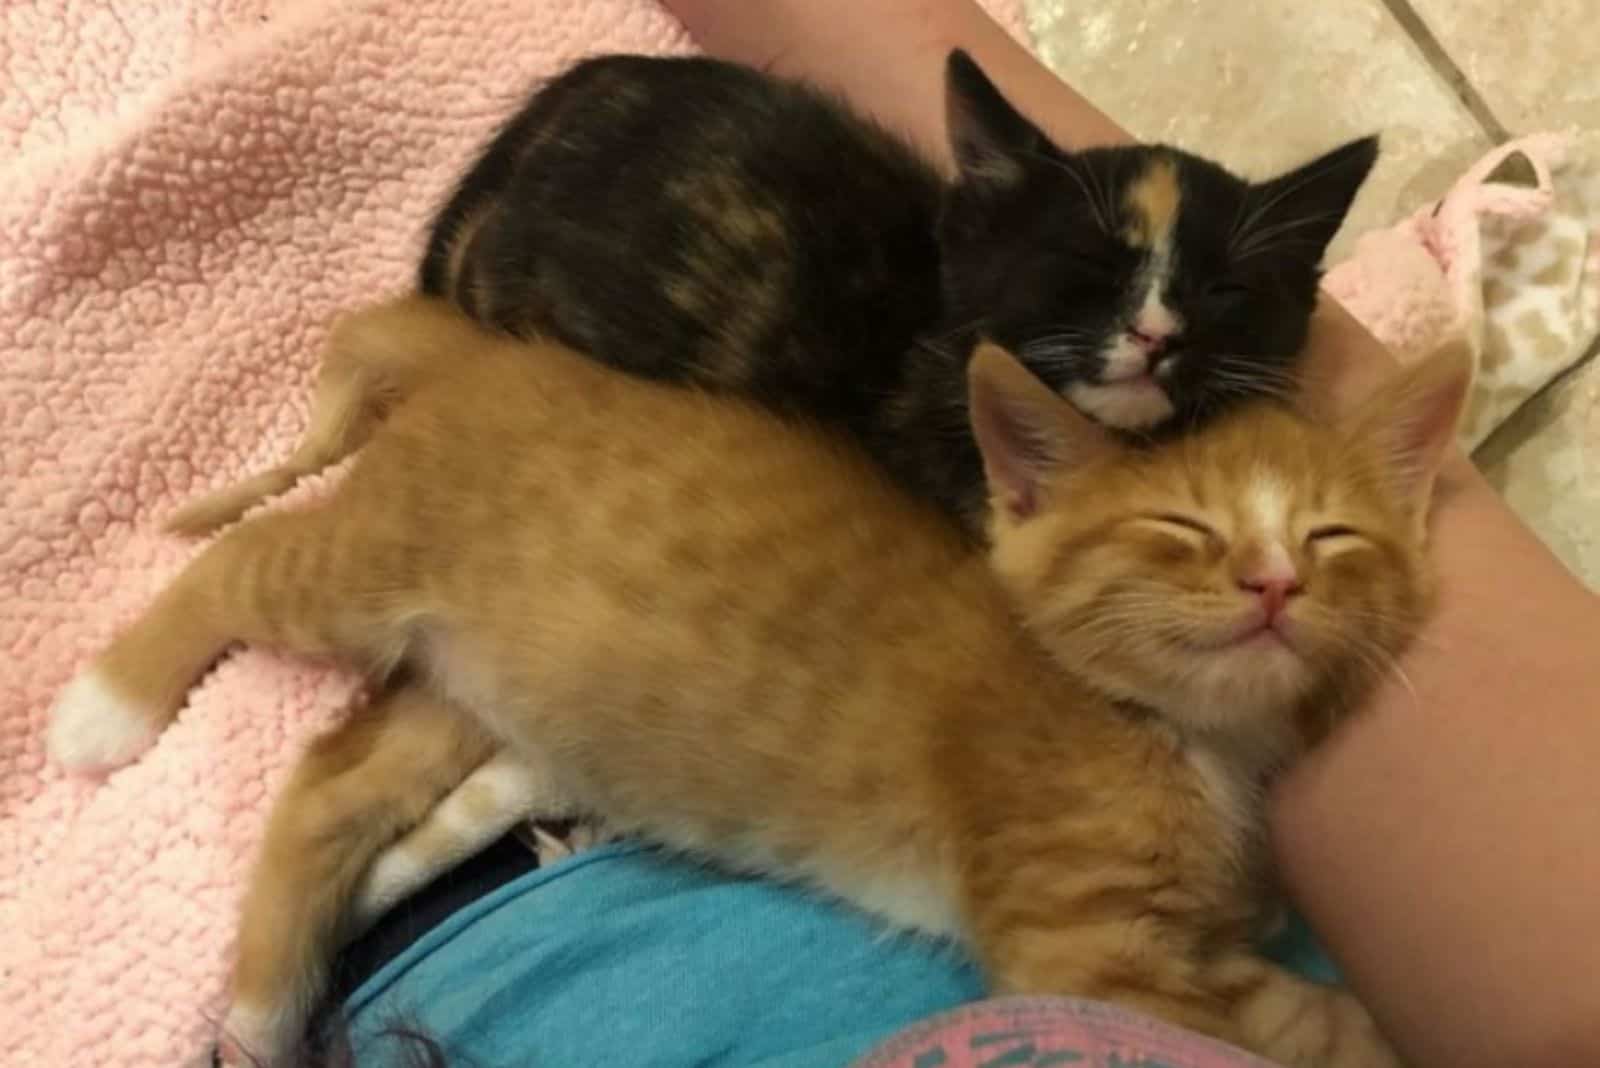 two kittens sleep leaning on a man's arm